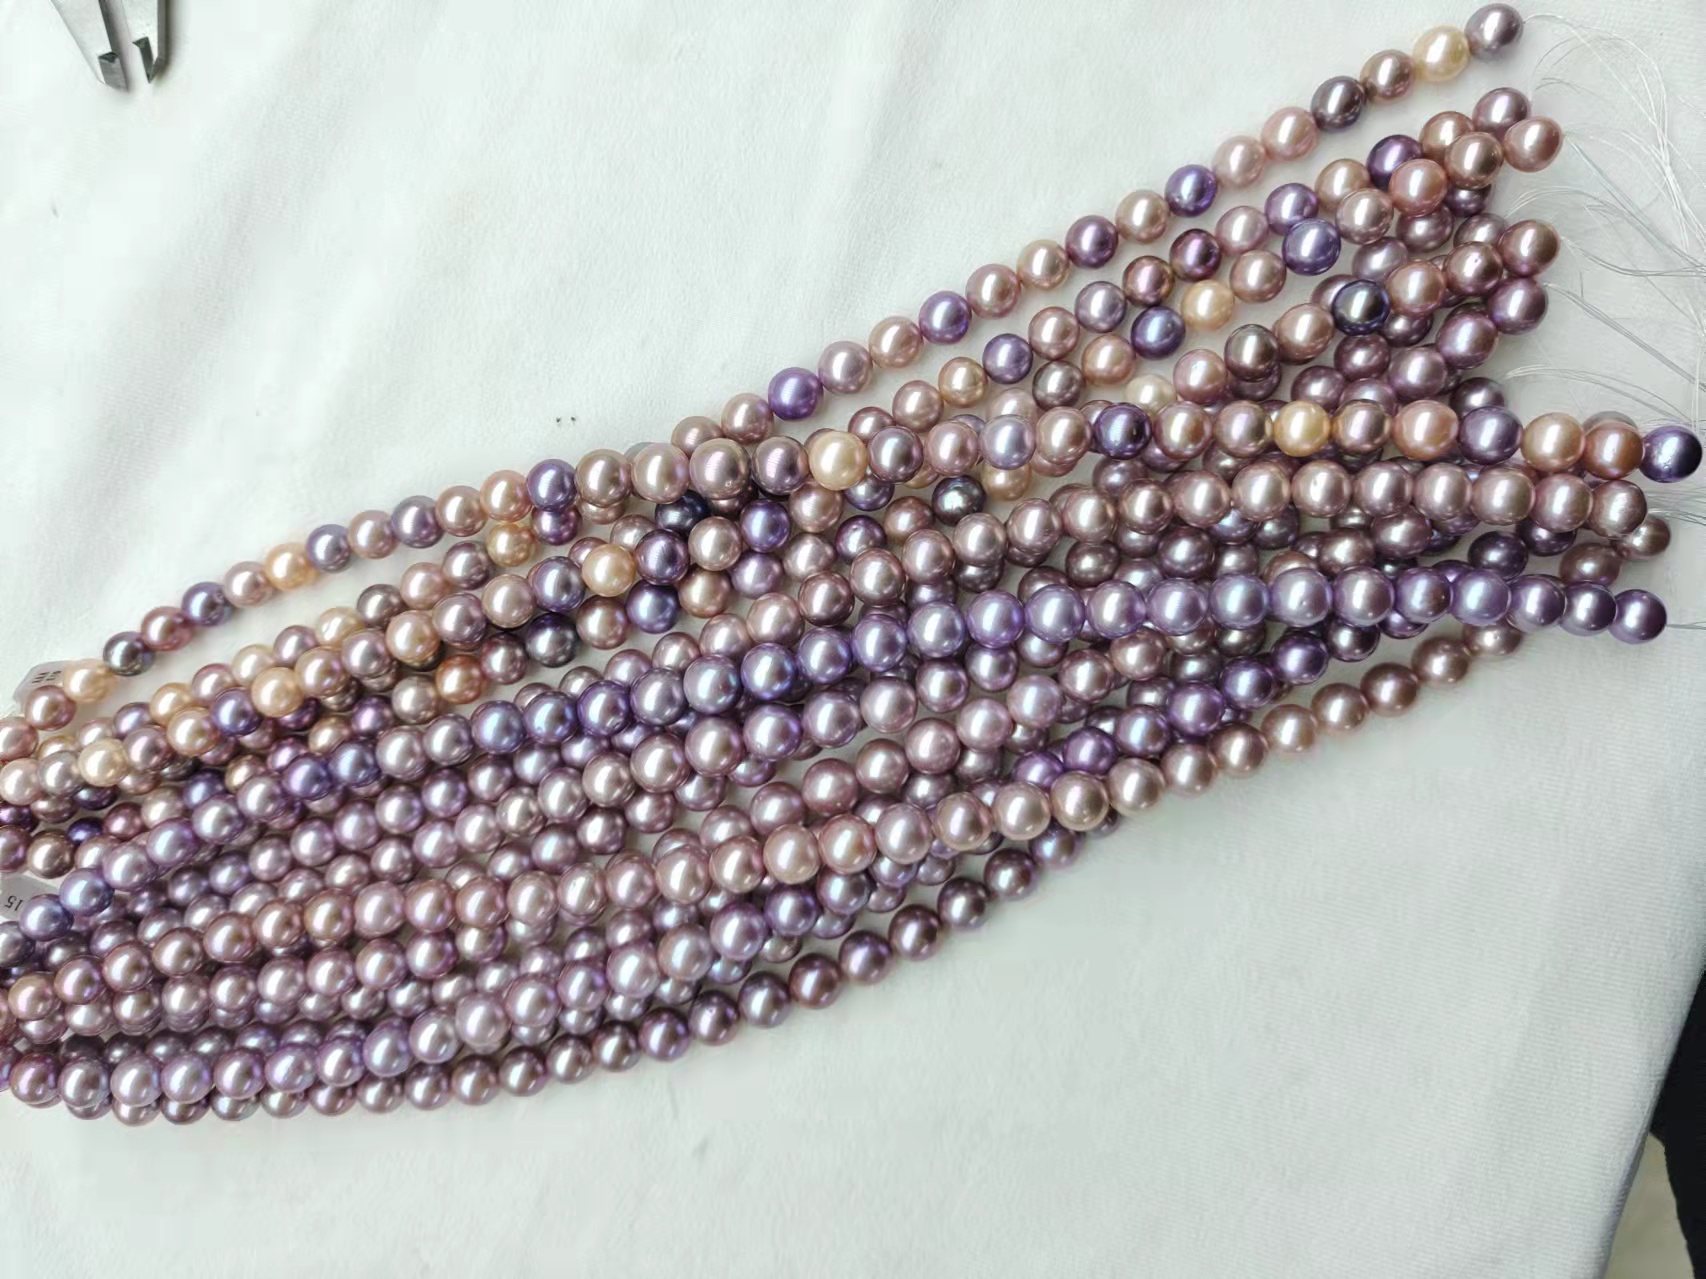 10-13.5 mm Pure pearls near round loose purple pearls wholesale freshwater pearl in strand